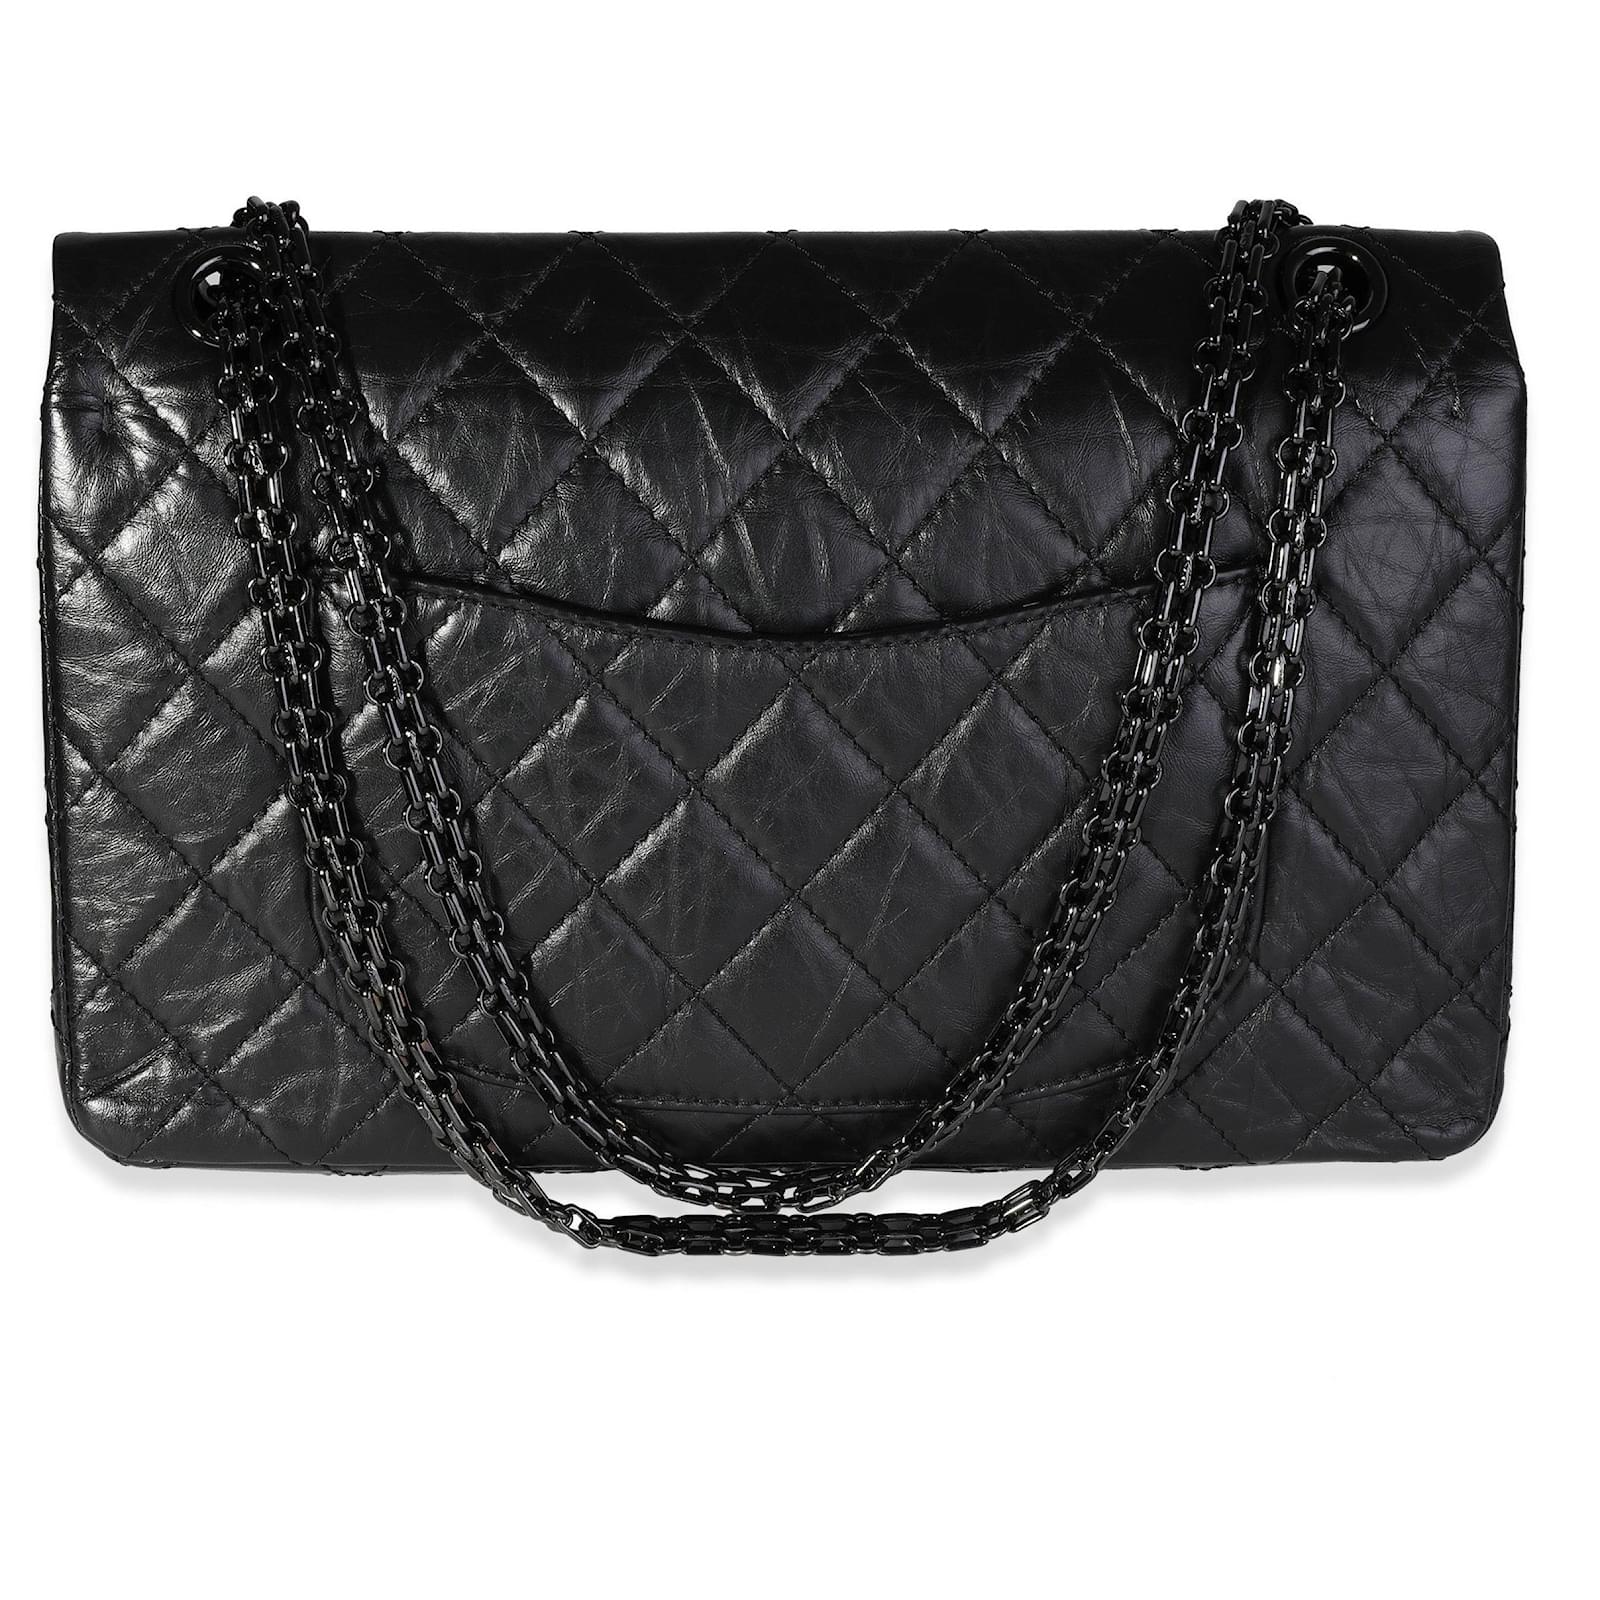 Chanel So Black Quilted Calfskin 2.55 Large Reissue 226 Double Flap Ruthenium Hardware, 2019 (Very Good), Womens Handbag